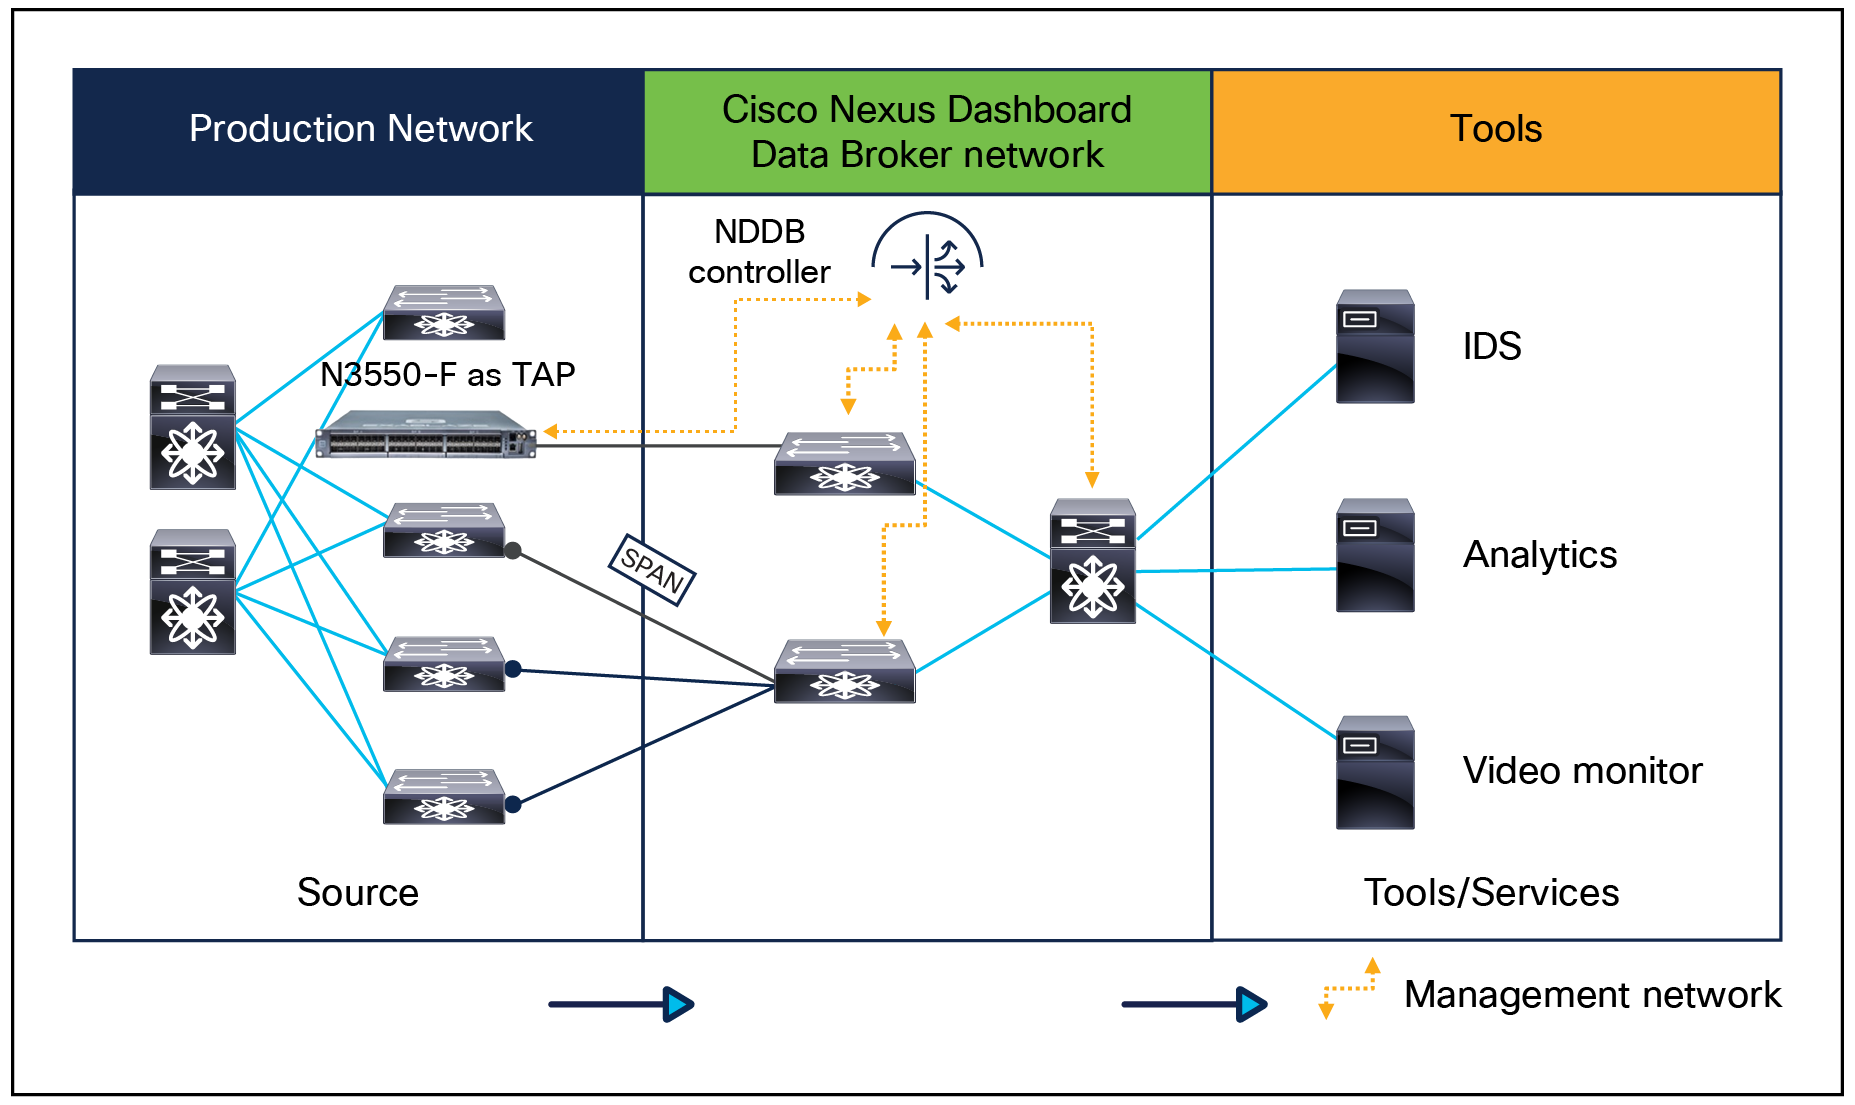 Provisioning Cisco Nexus 3550-F as a TAP device